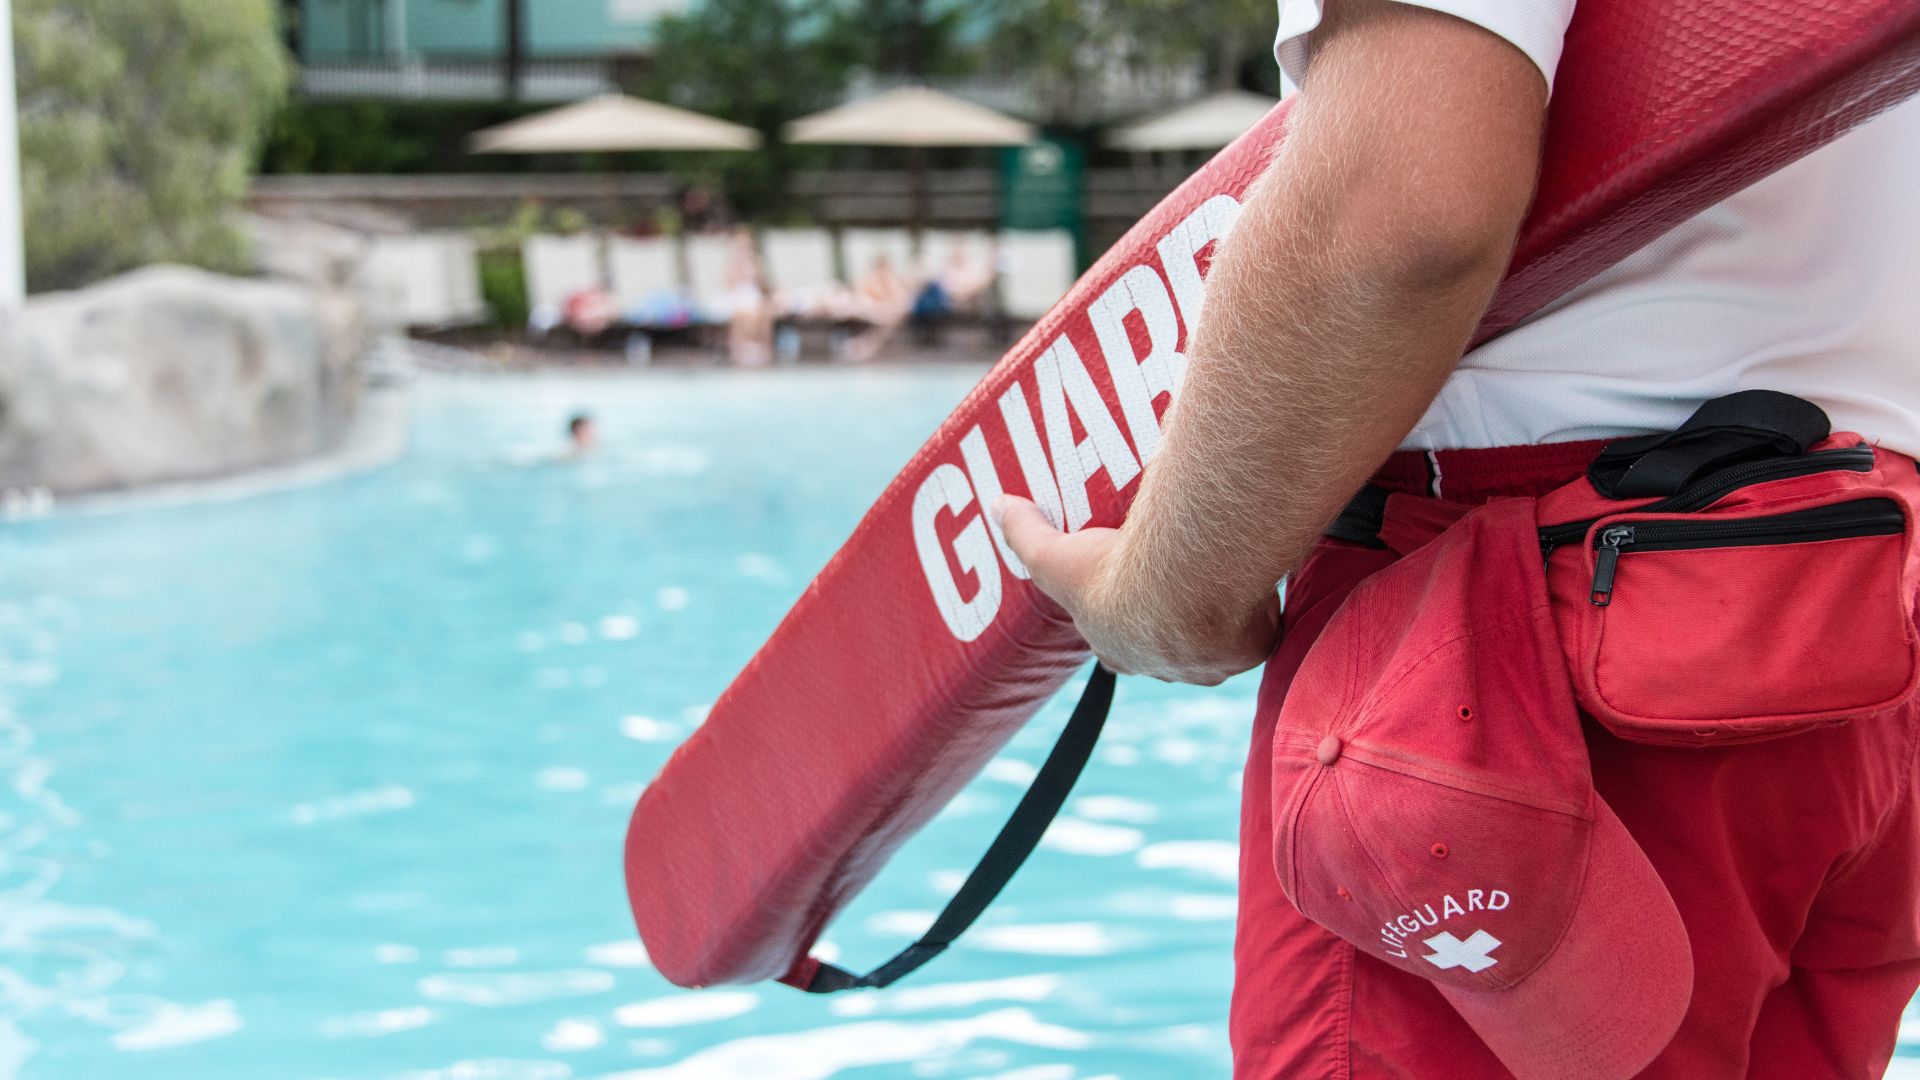 Lifeguard CPR Certification | Skills for Aquatic Safety